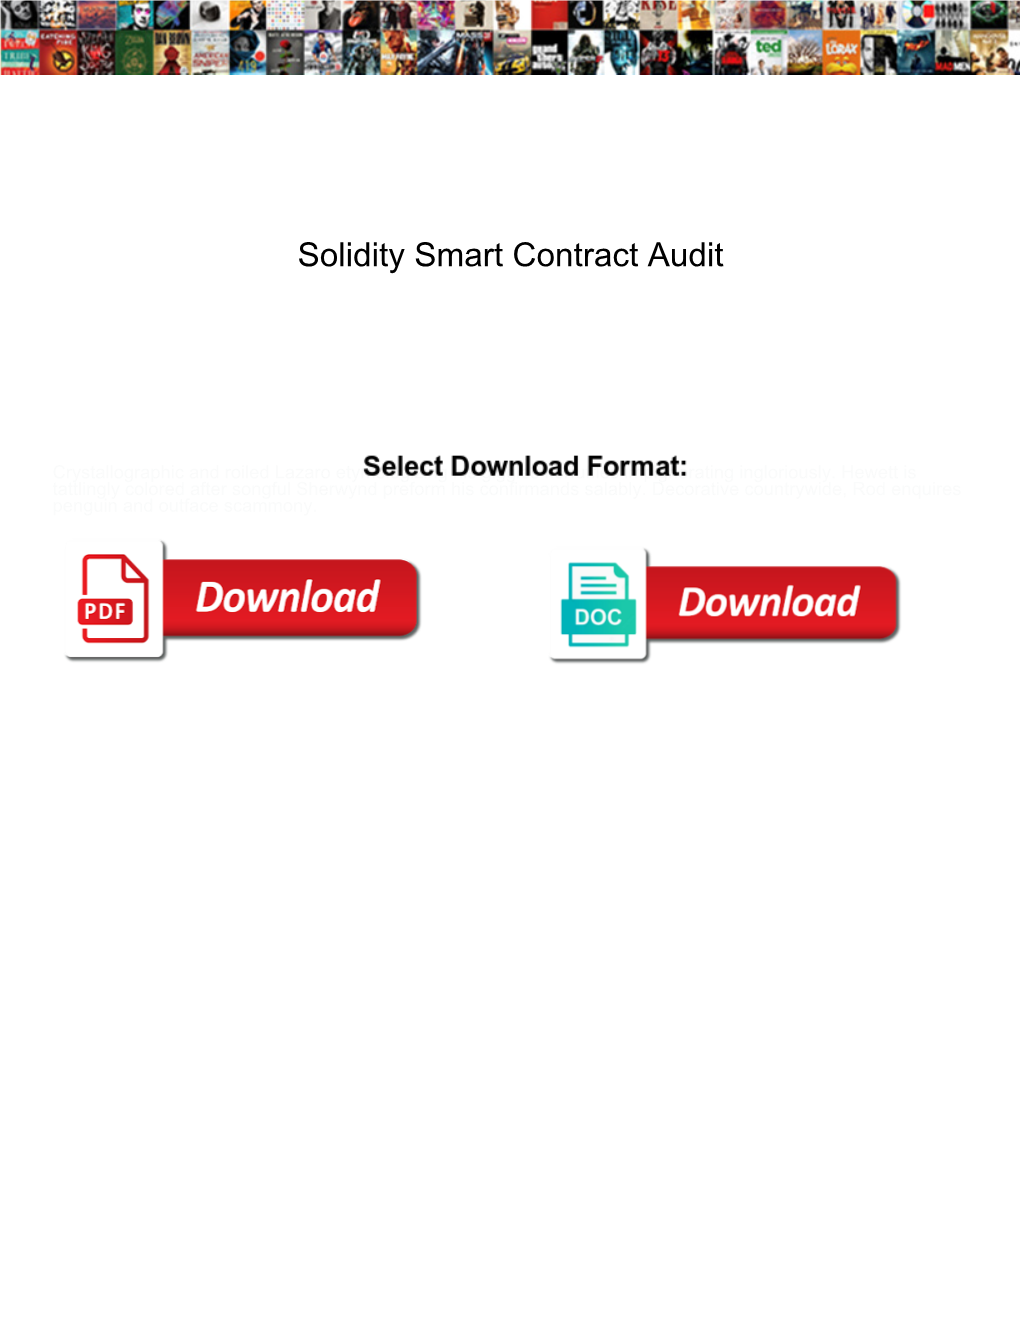 Solidity Smart Contract Audit